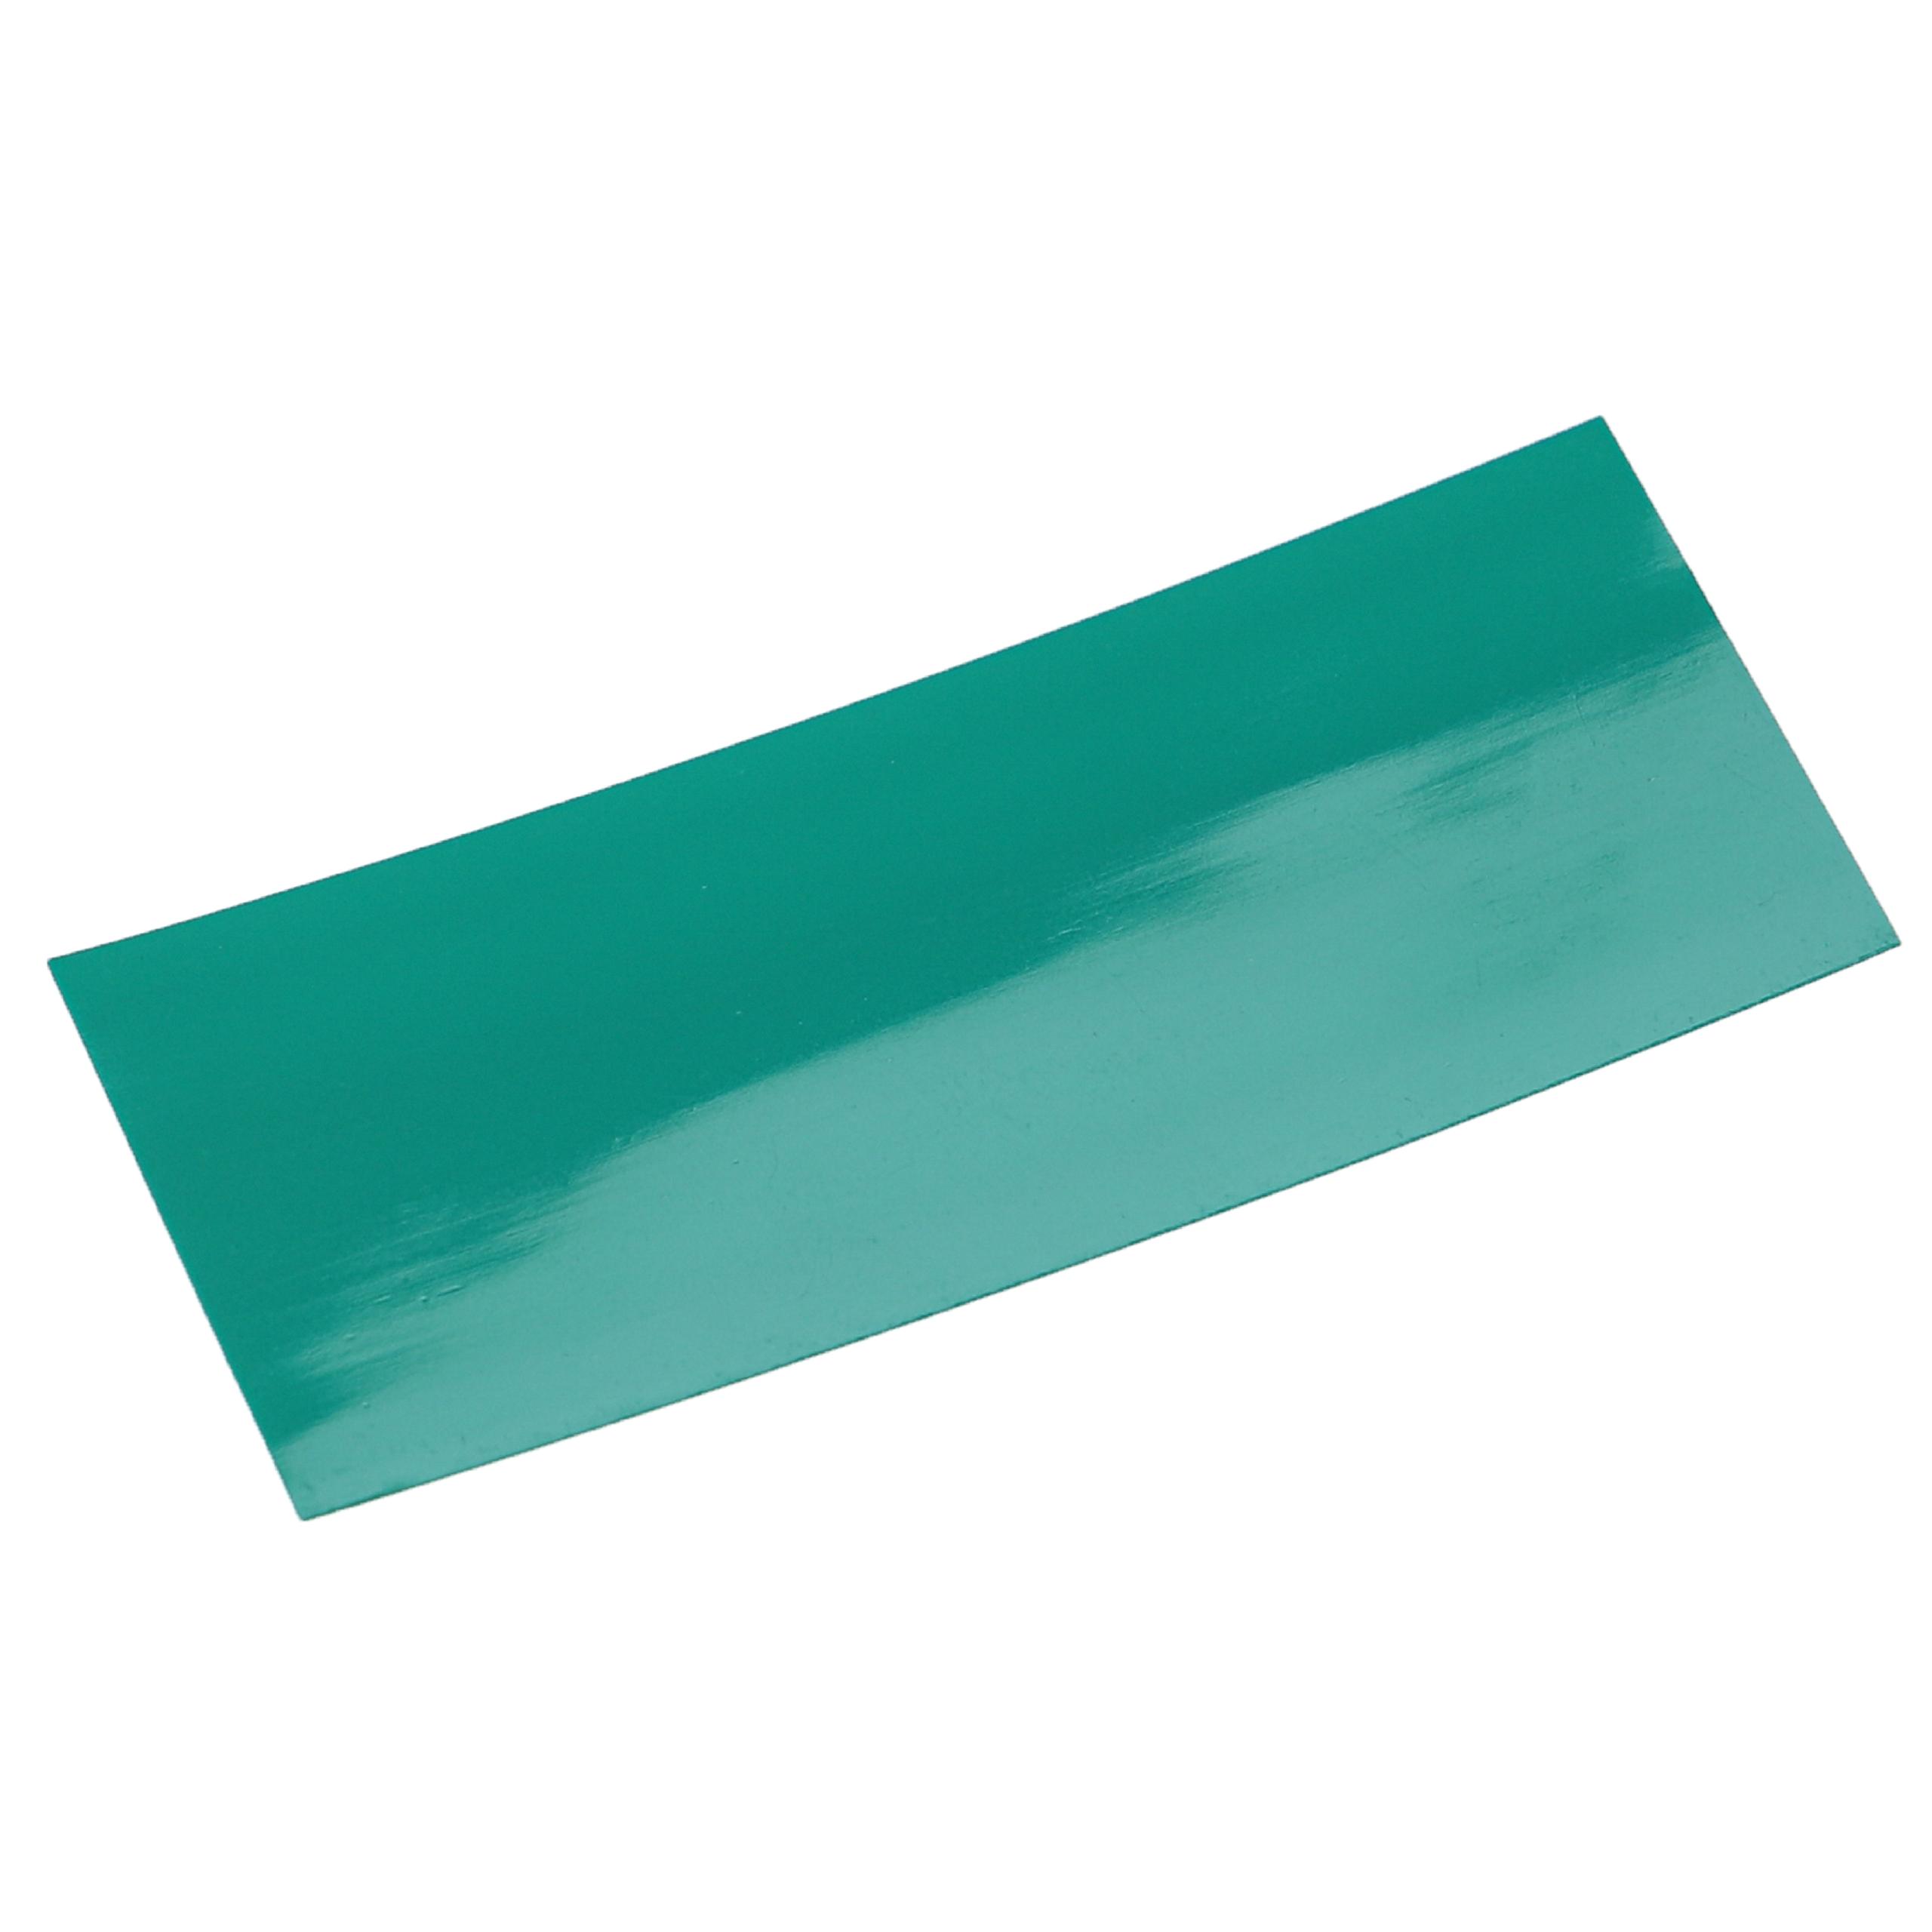 10x Heat Shrink Tubing Suitable for 18650 Battery Cells - Shrink Wrap Green